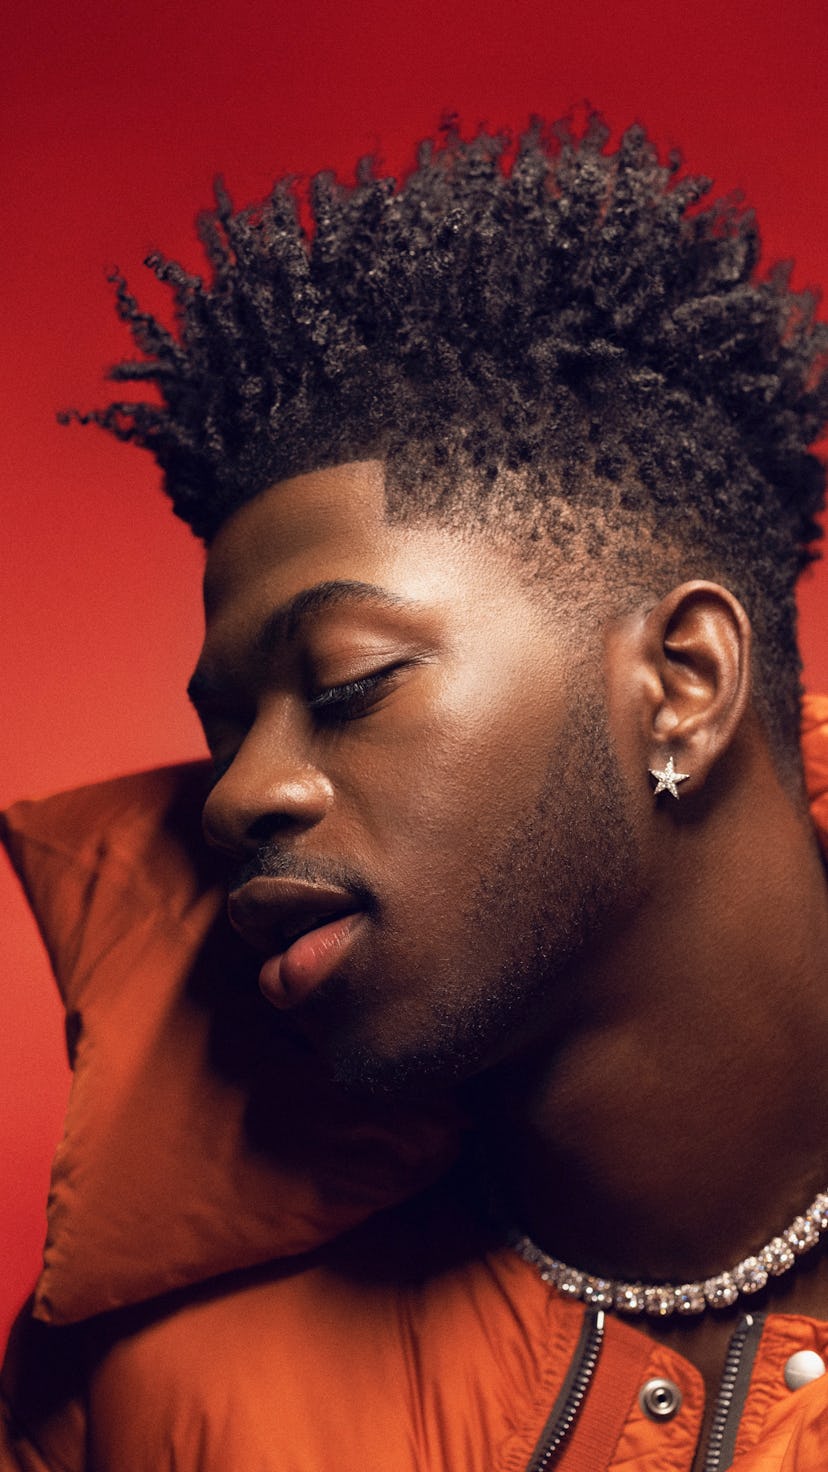 Cover of SOUNDCHECK featuring singer Lil Nas X with a red background and theme